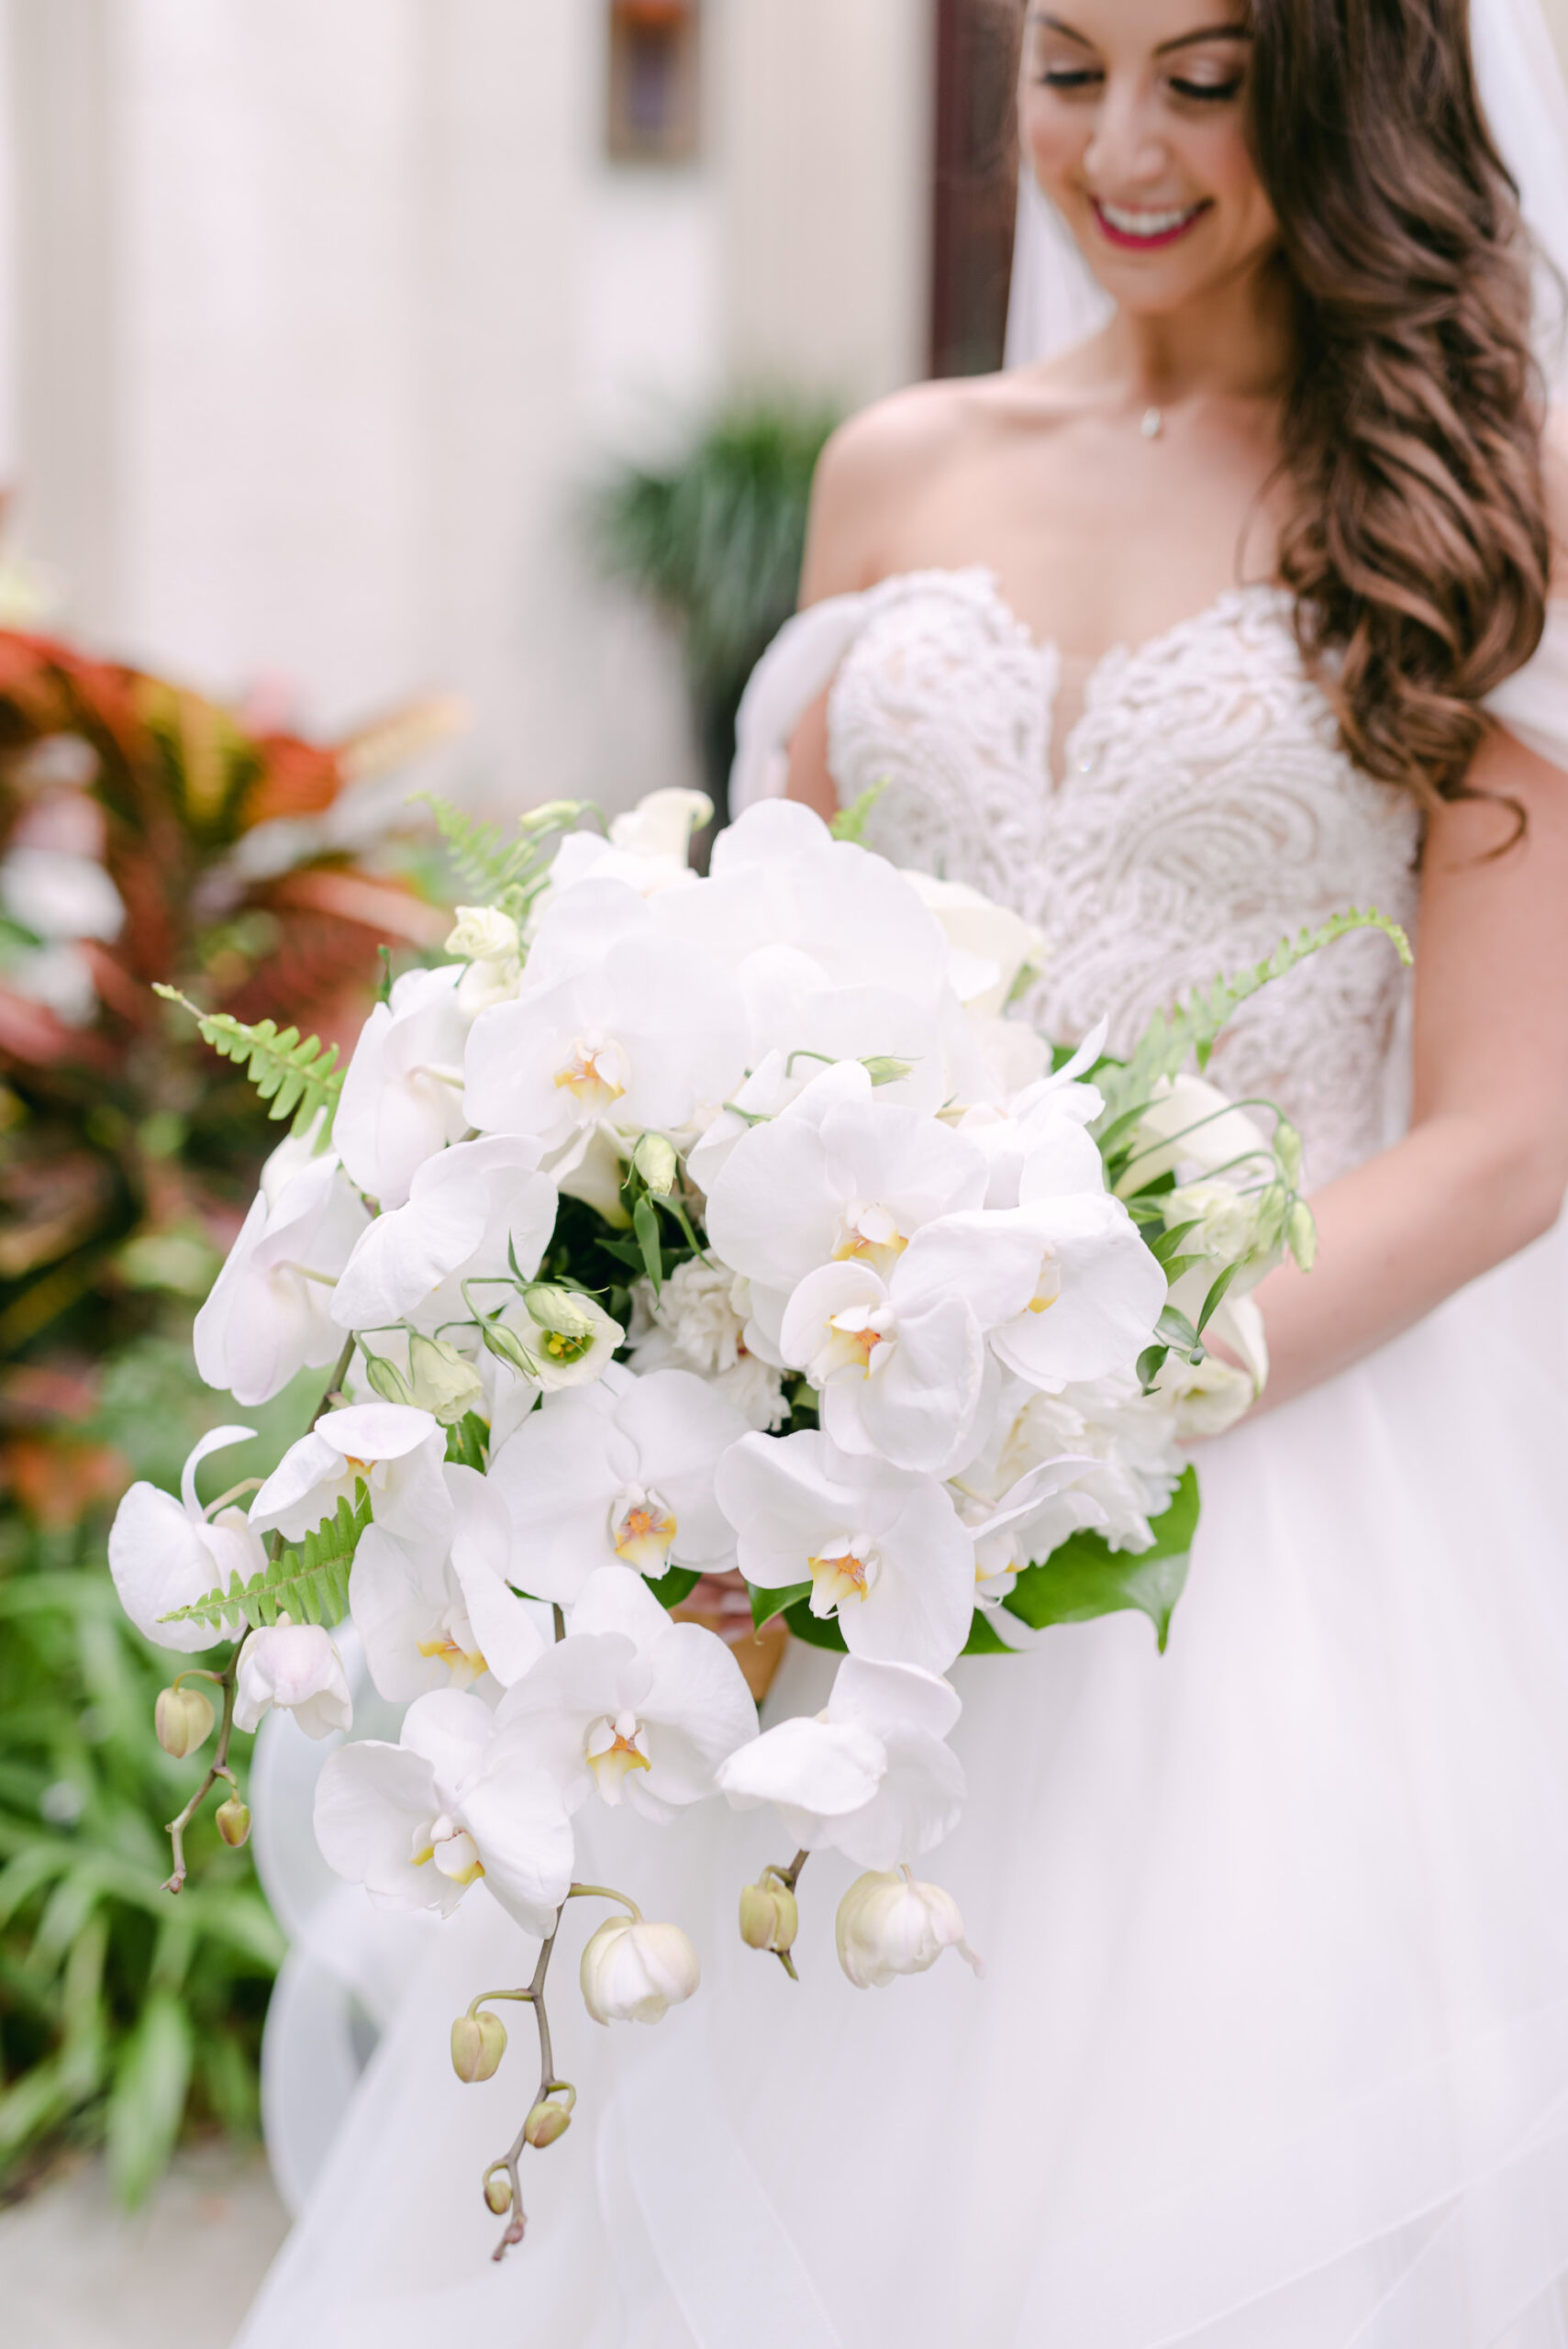 Timeless White Orchard Wedding Bouquet Ideas | Tampa.Wedding Florist FH Events